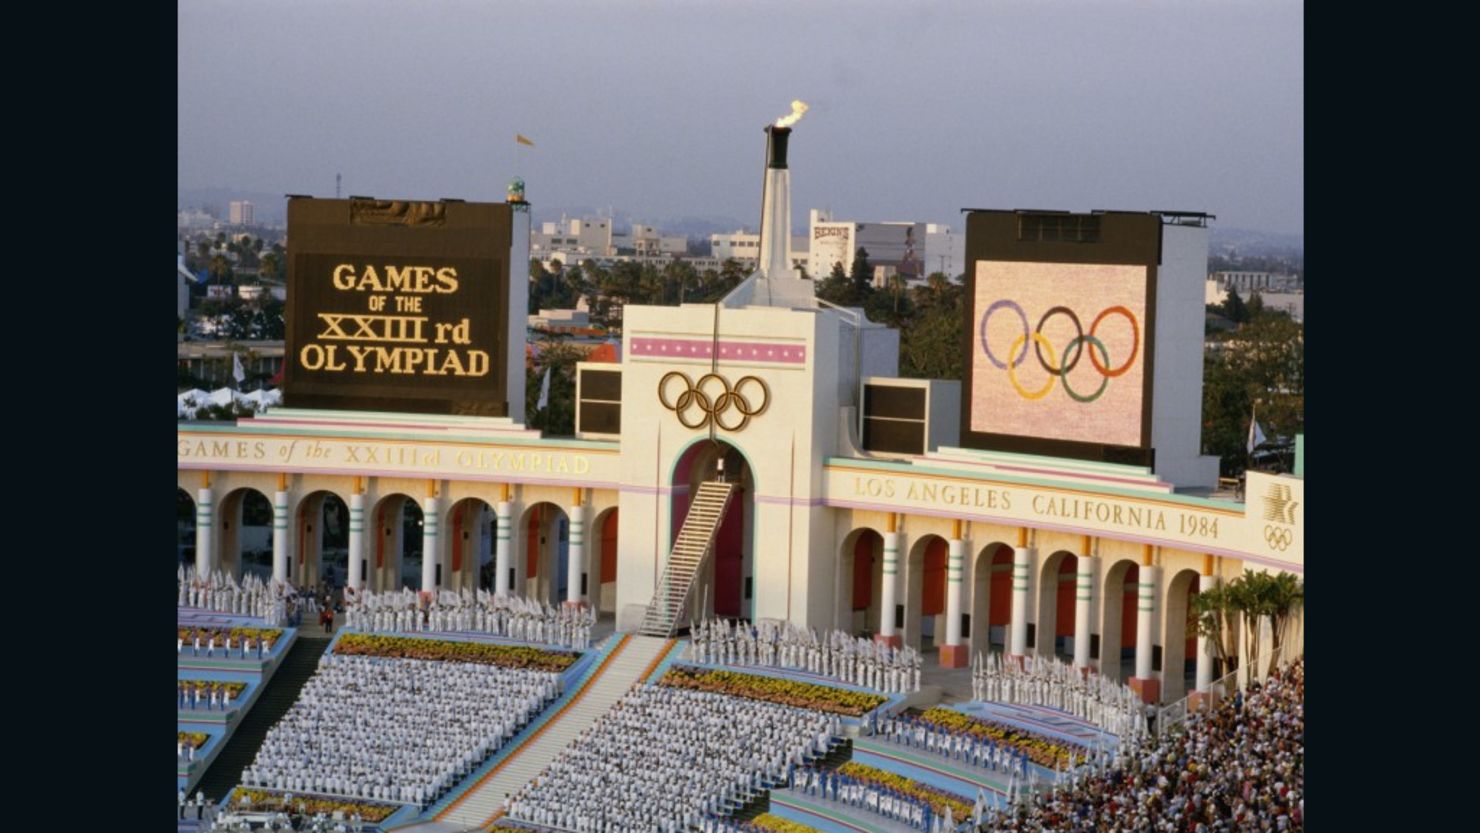 Los Angeles last hosted the Olympics in 1984, with opening and closing ceremonies plus track and field events held in the L.A. Coliseum.